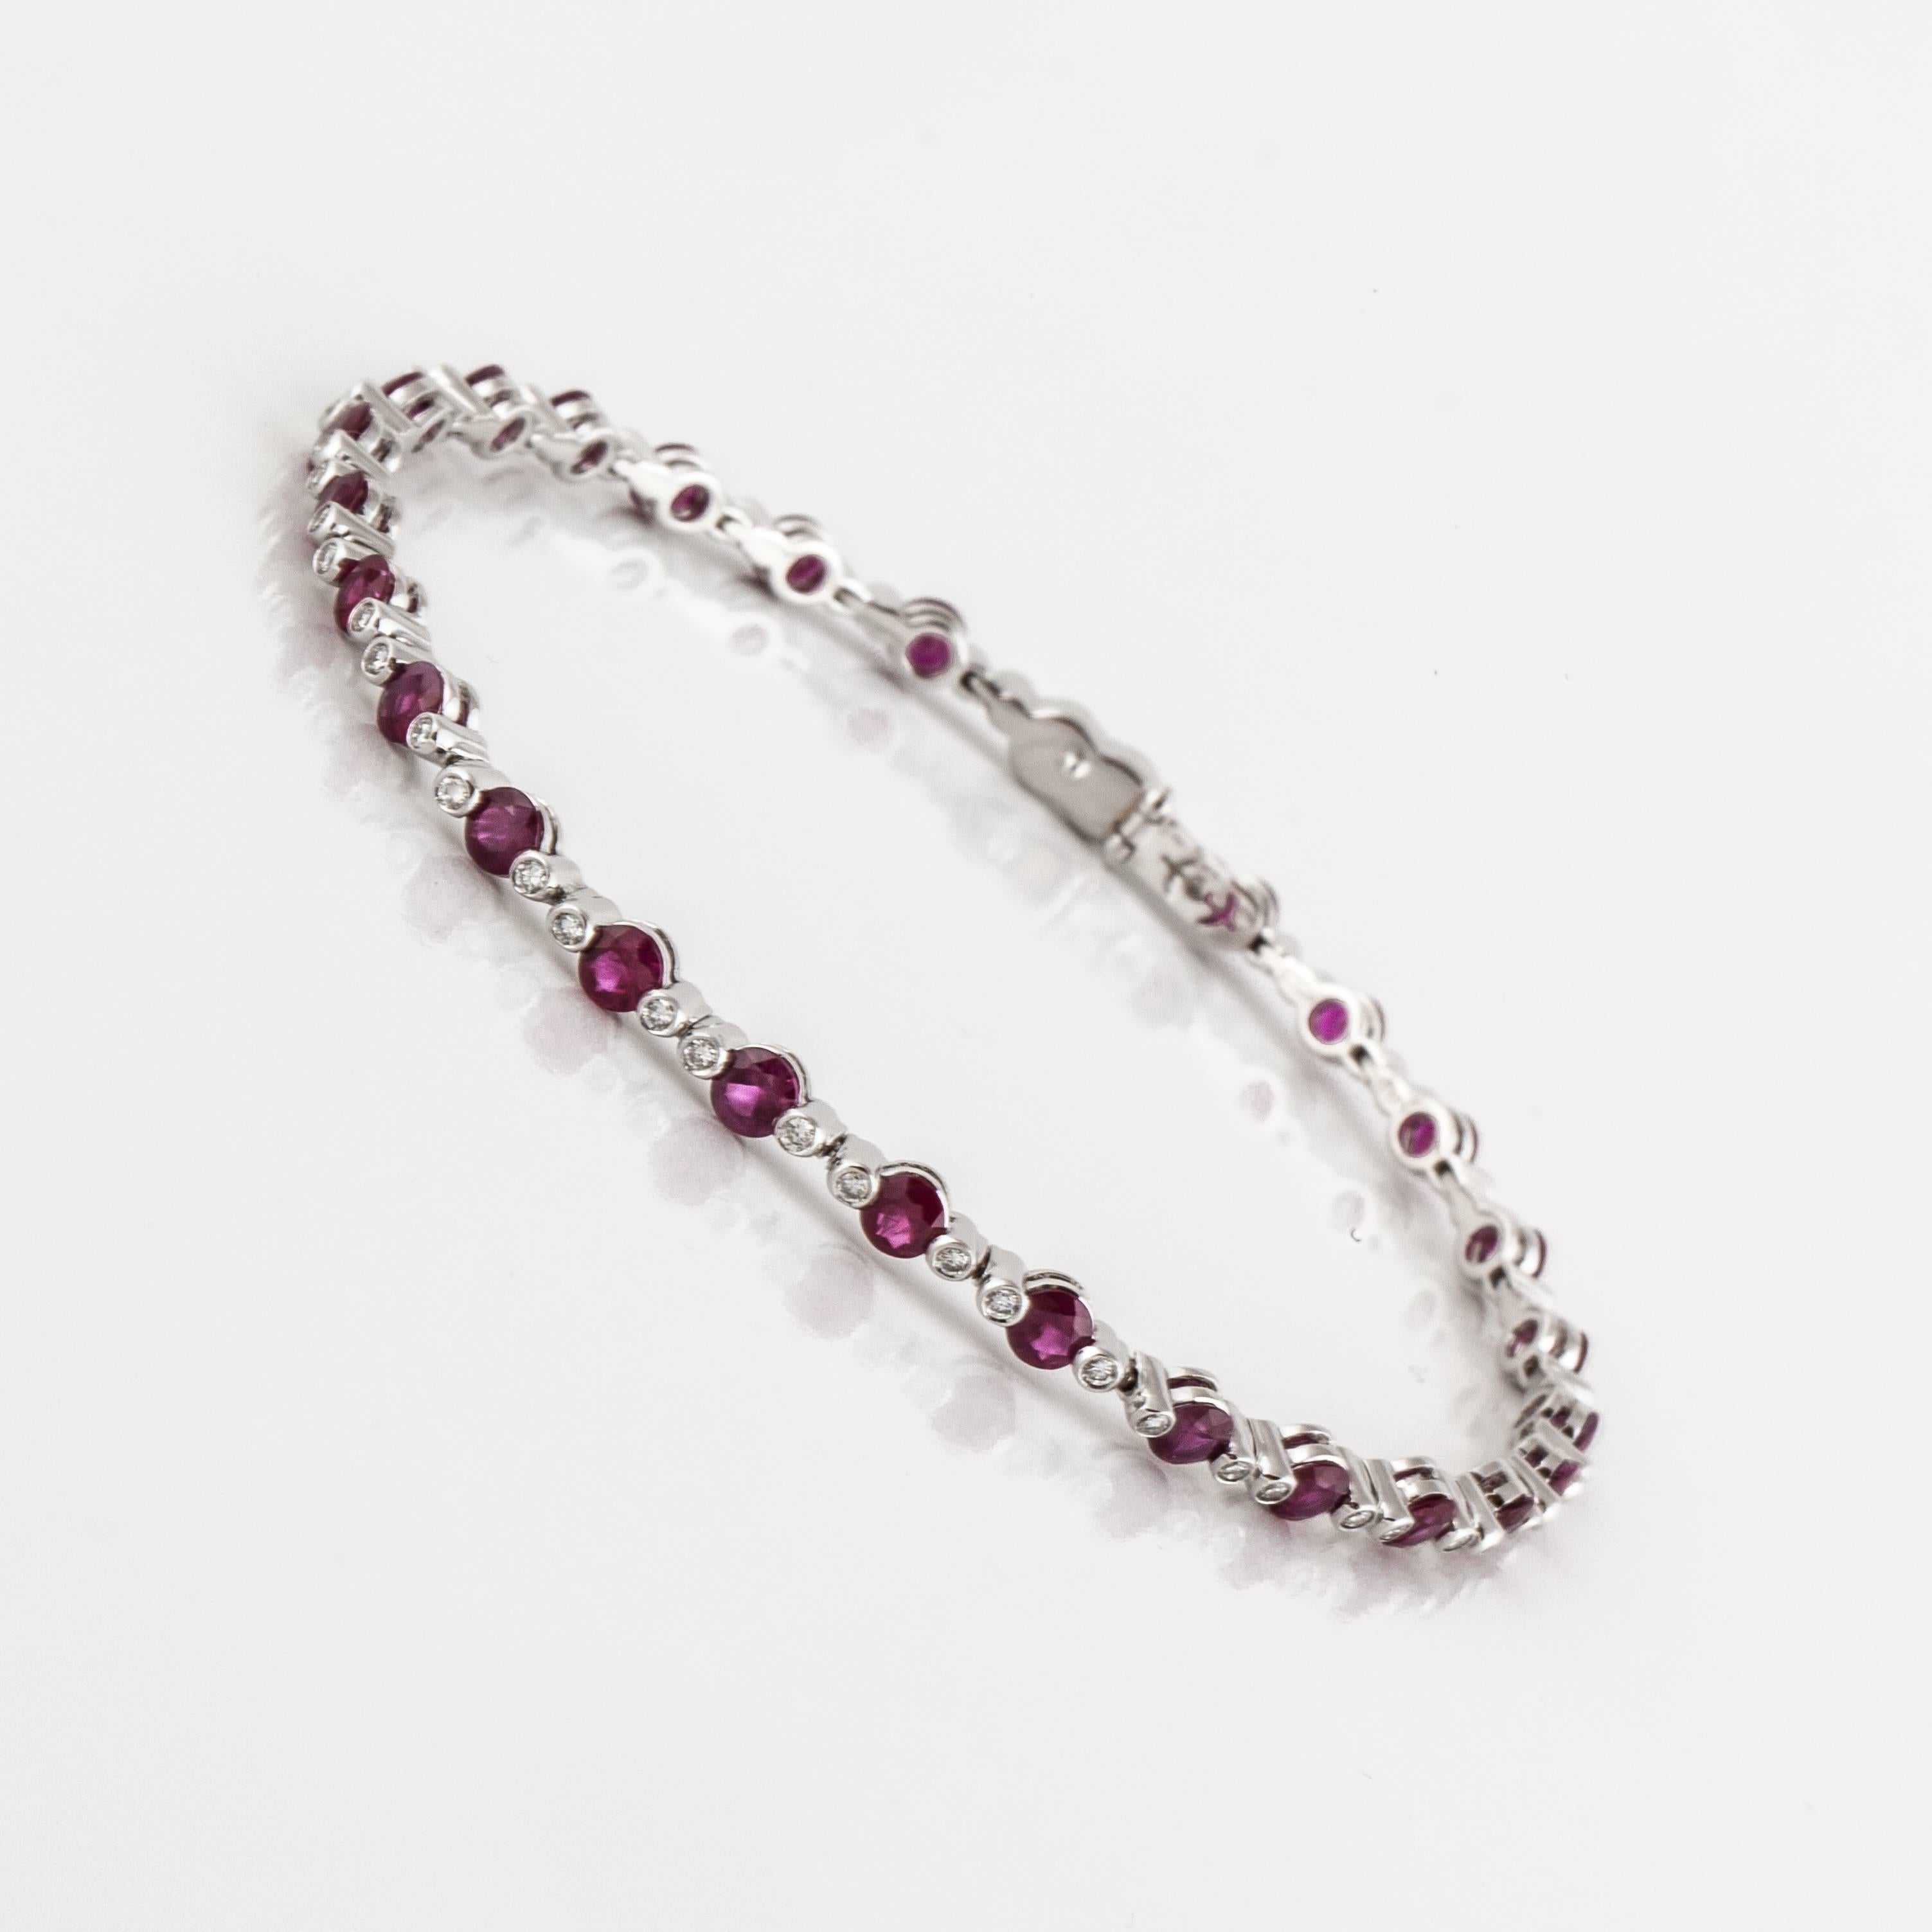 18K white gold line bracelet by Favero featuring rubies and diamonds.  The bracelet contains 26 round rubies totaling 4 carats and 63 round diamonds totaling 0.60 carats; H-I color and VS-SI clarity.  It measures 7.5 inches long and 1/8 of an inch